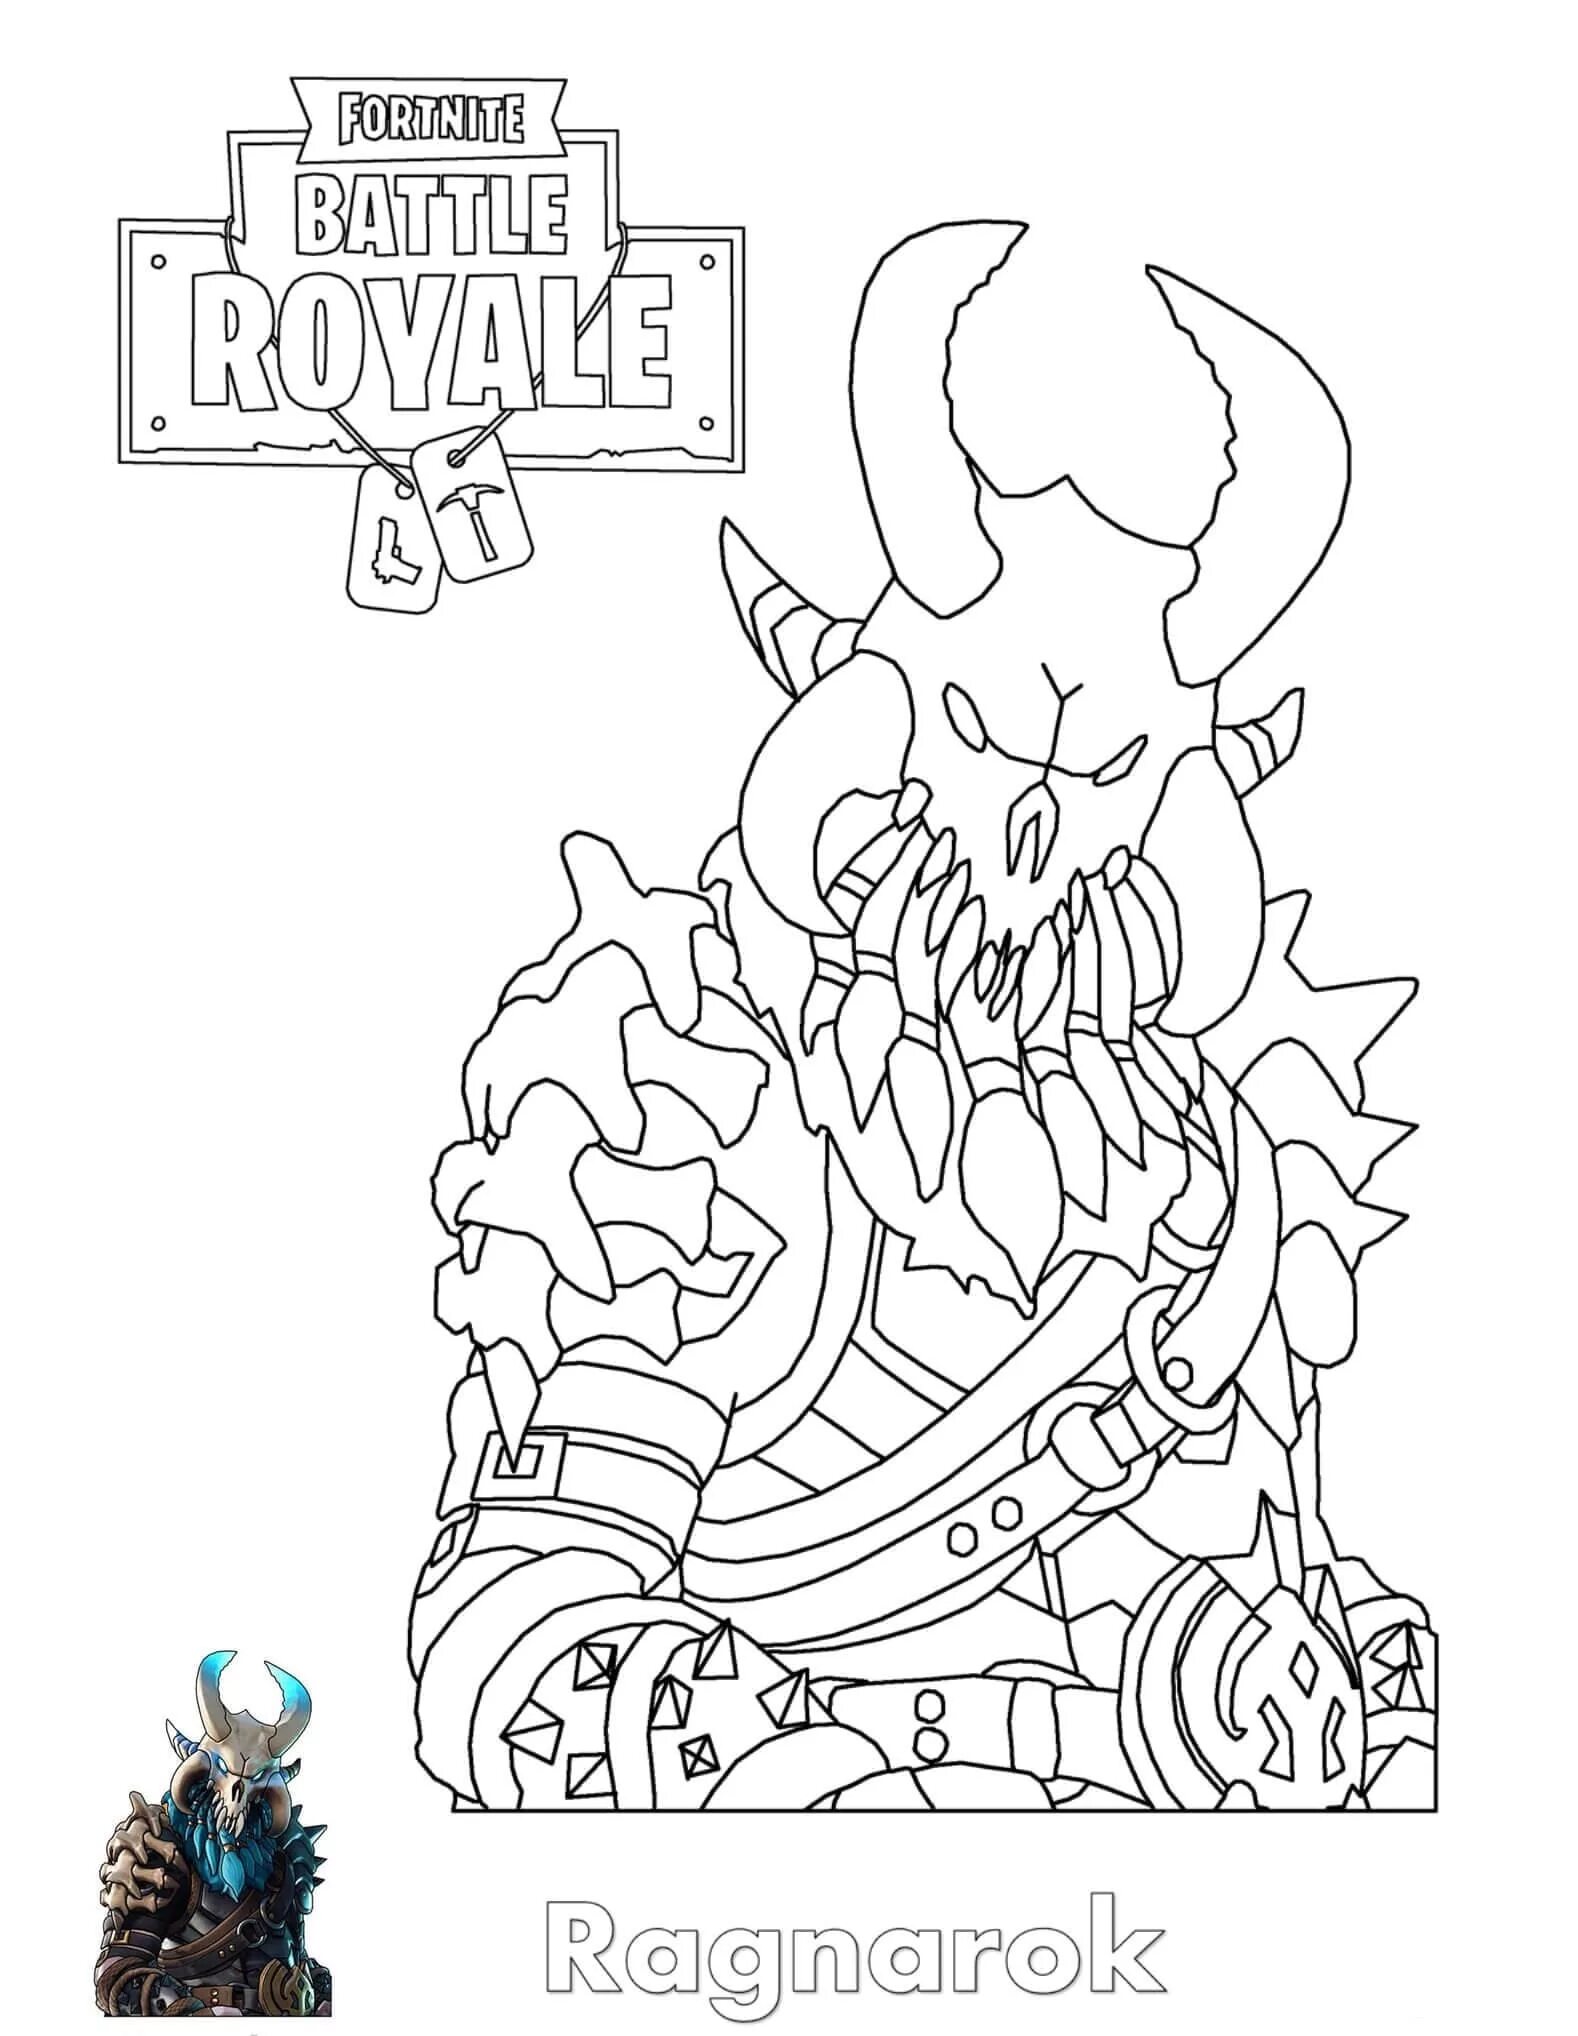 Generous ford knight coloring page